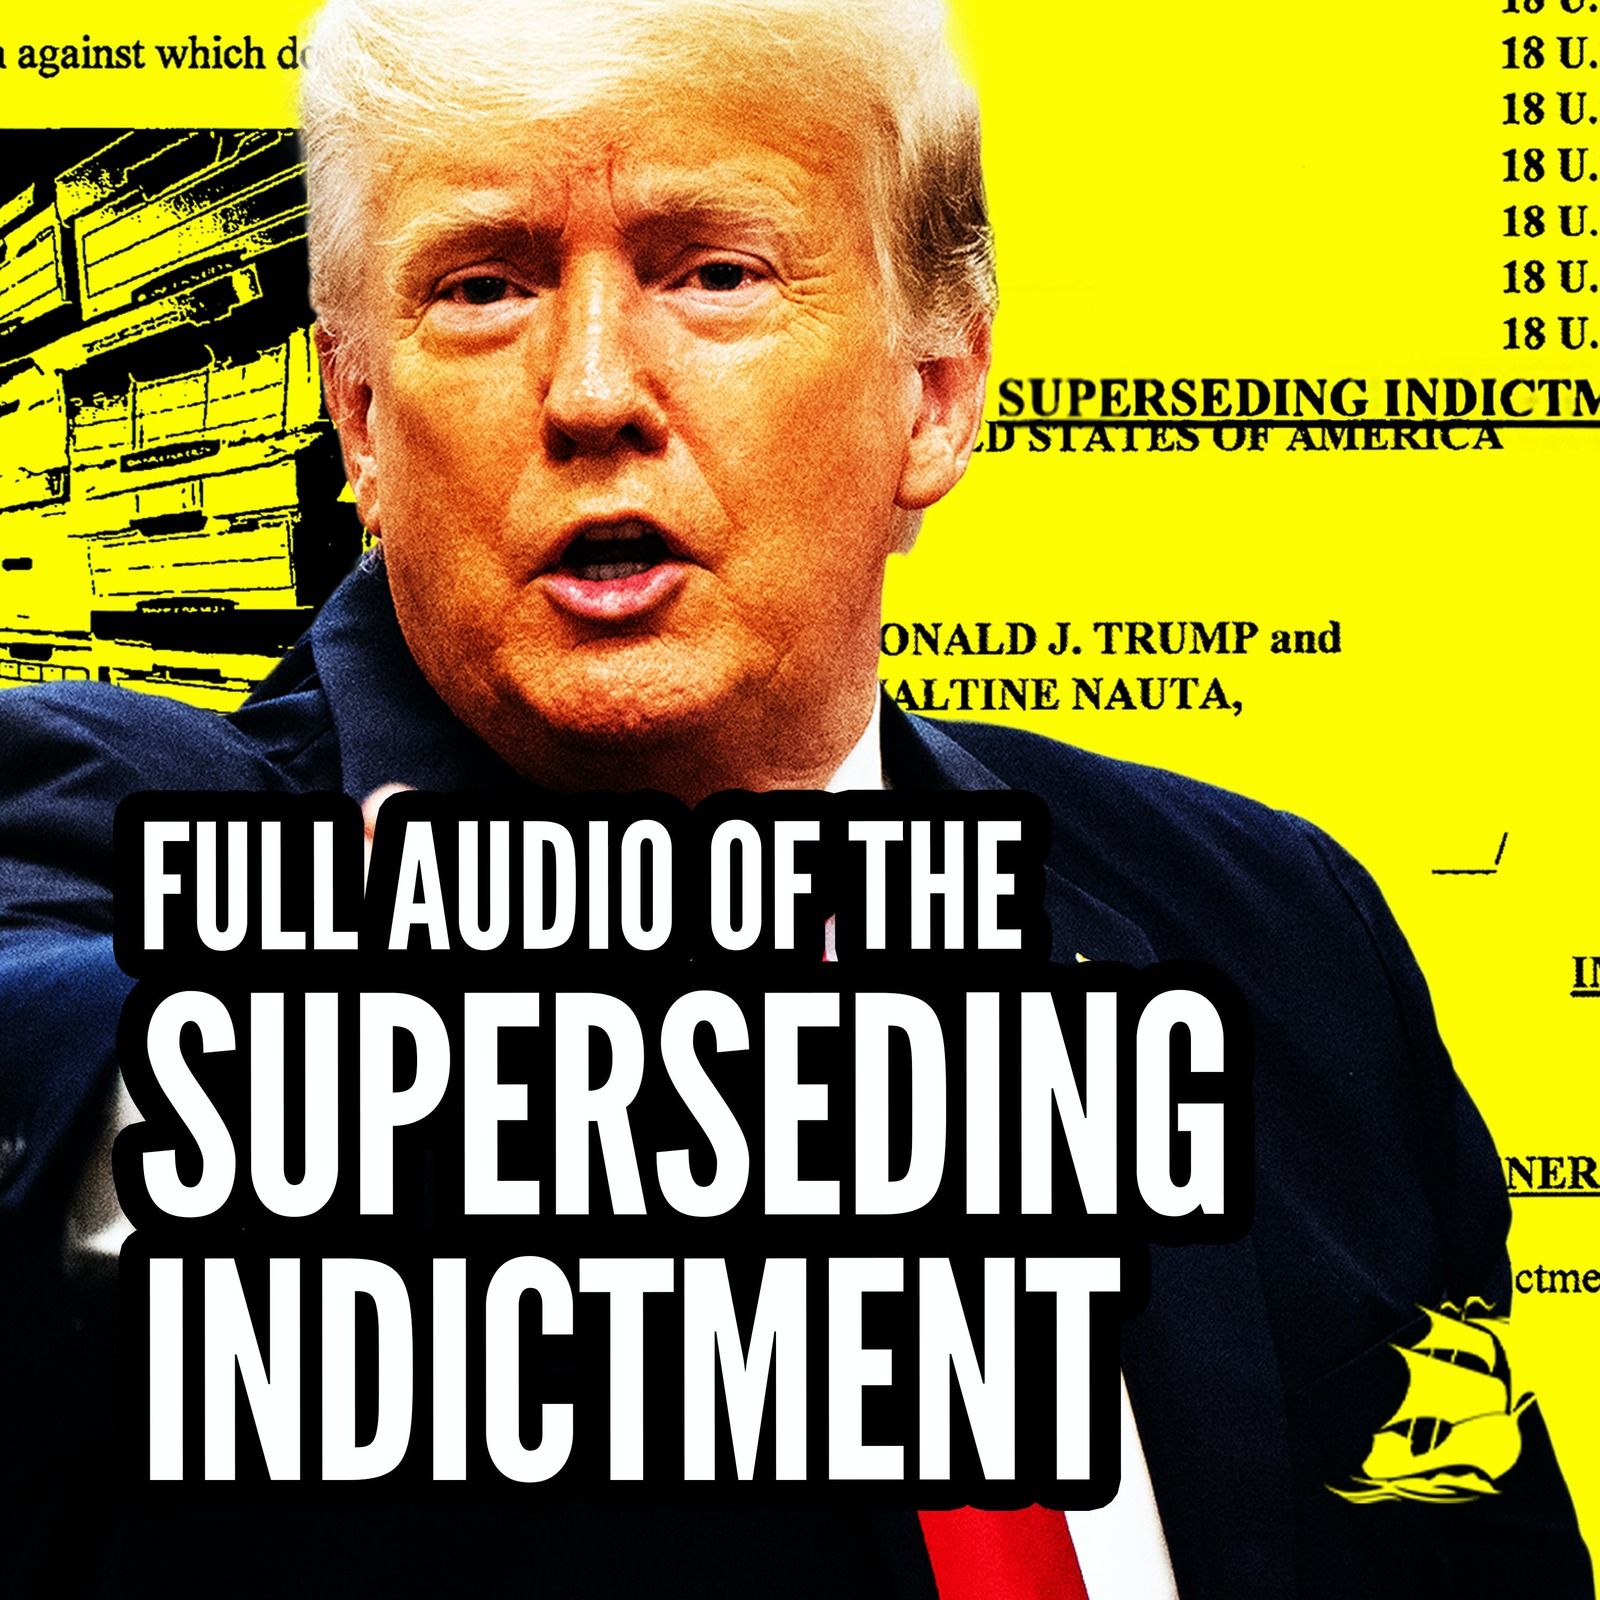 Bonus Episode: Listen to the Superseding Indictment by The Bulwark Podcast